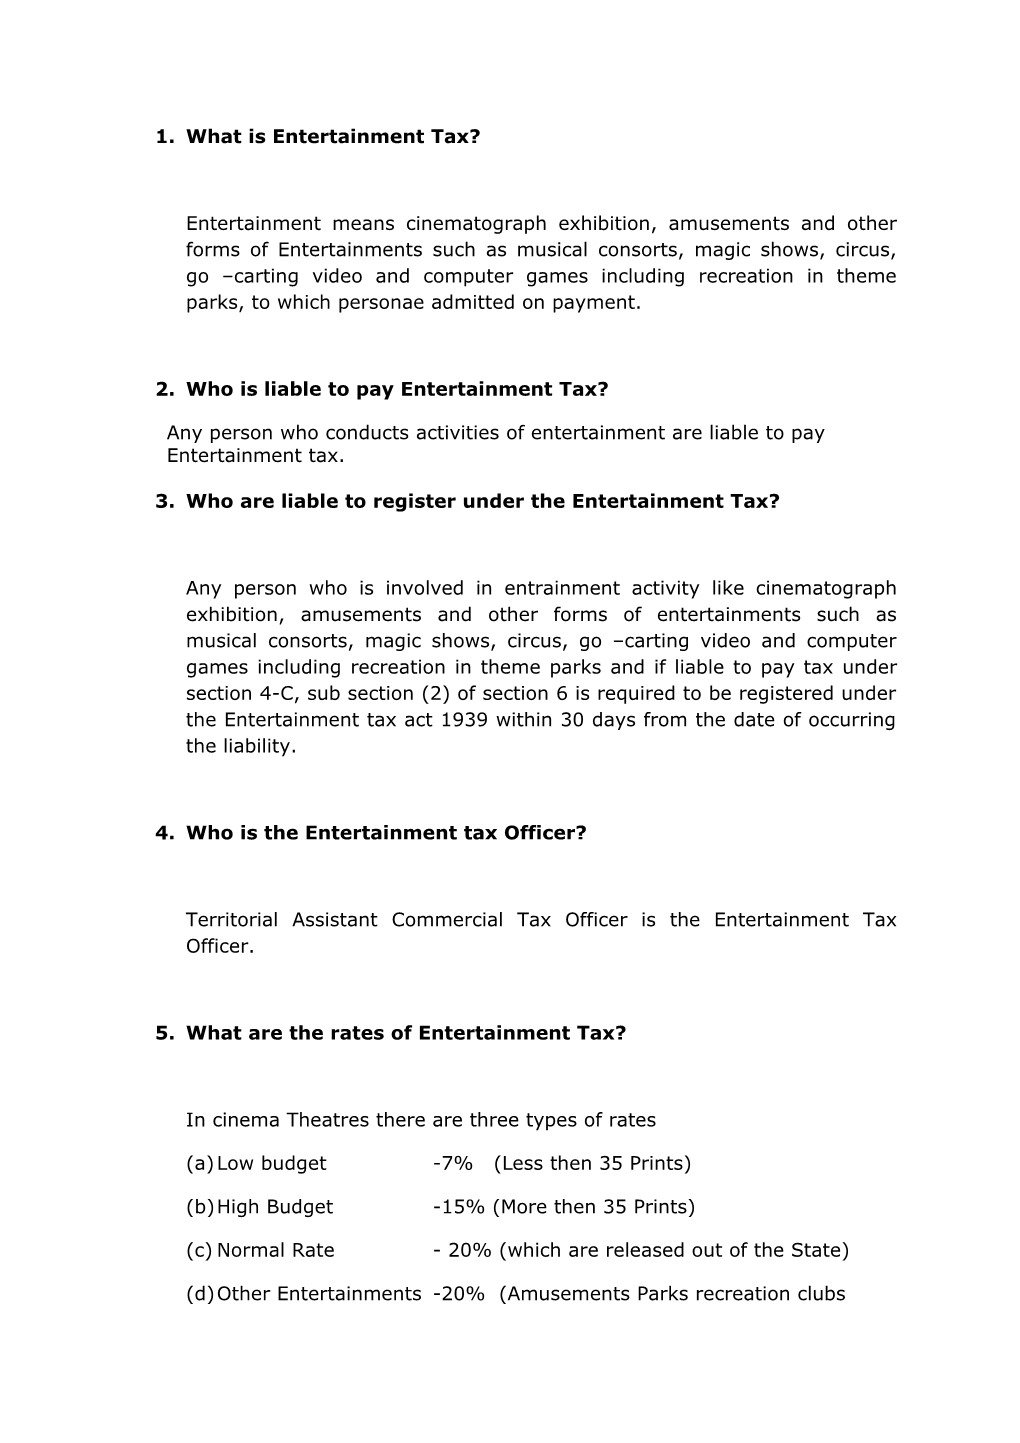 2. Who Is Liable to Pay Entertainment Tax?